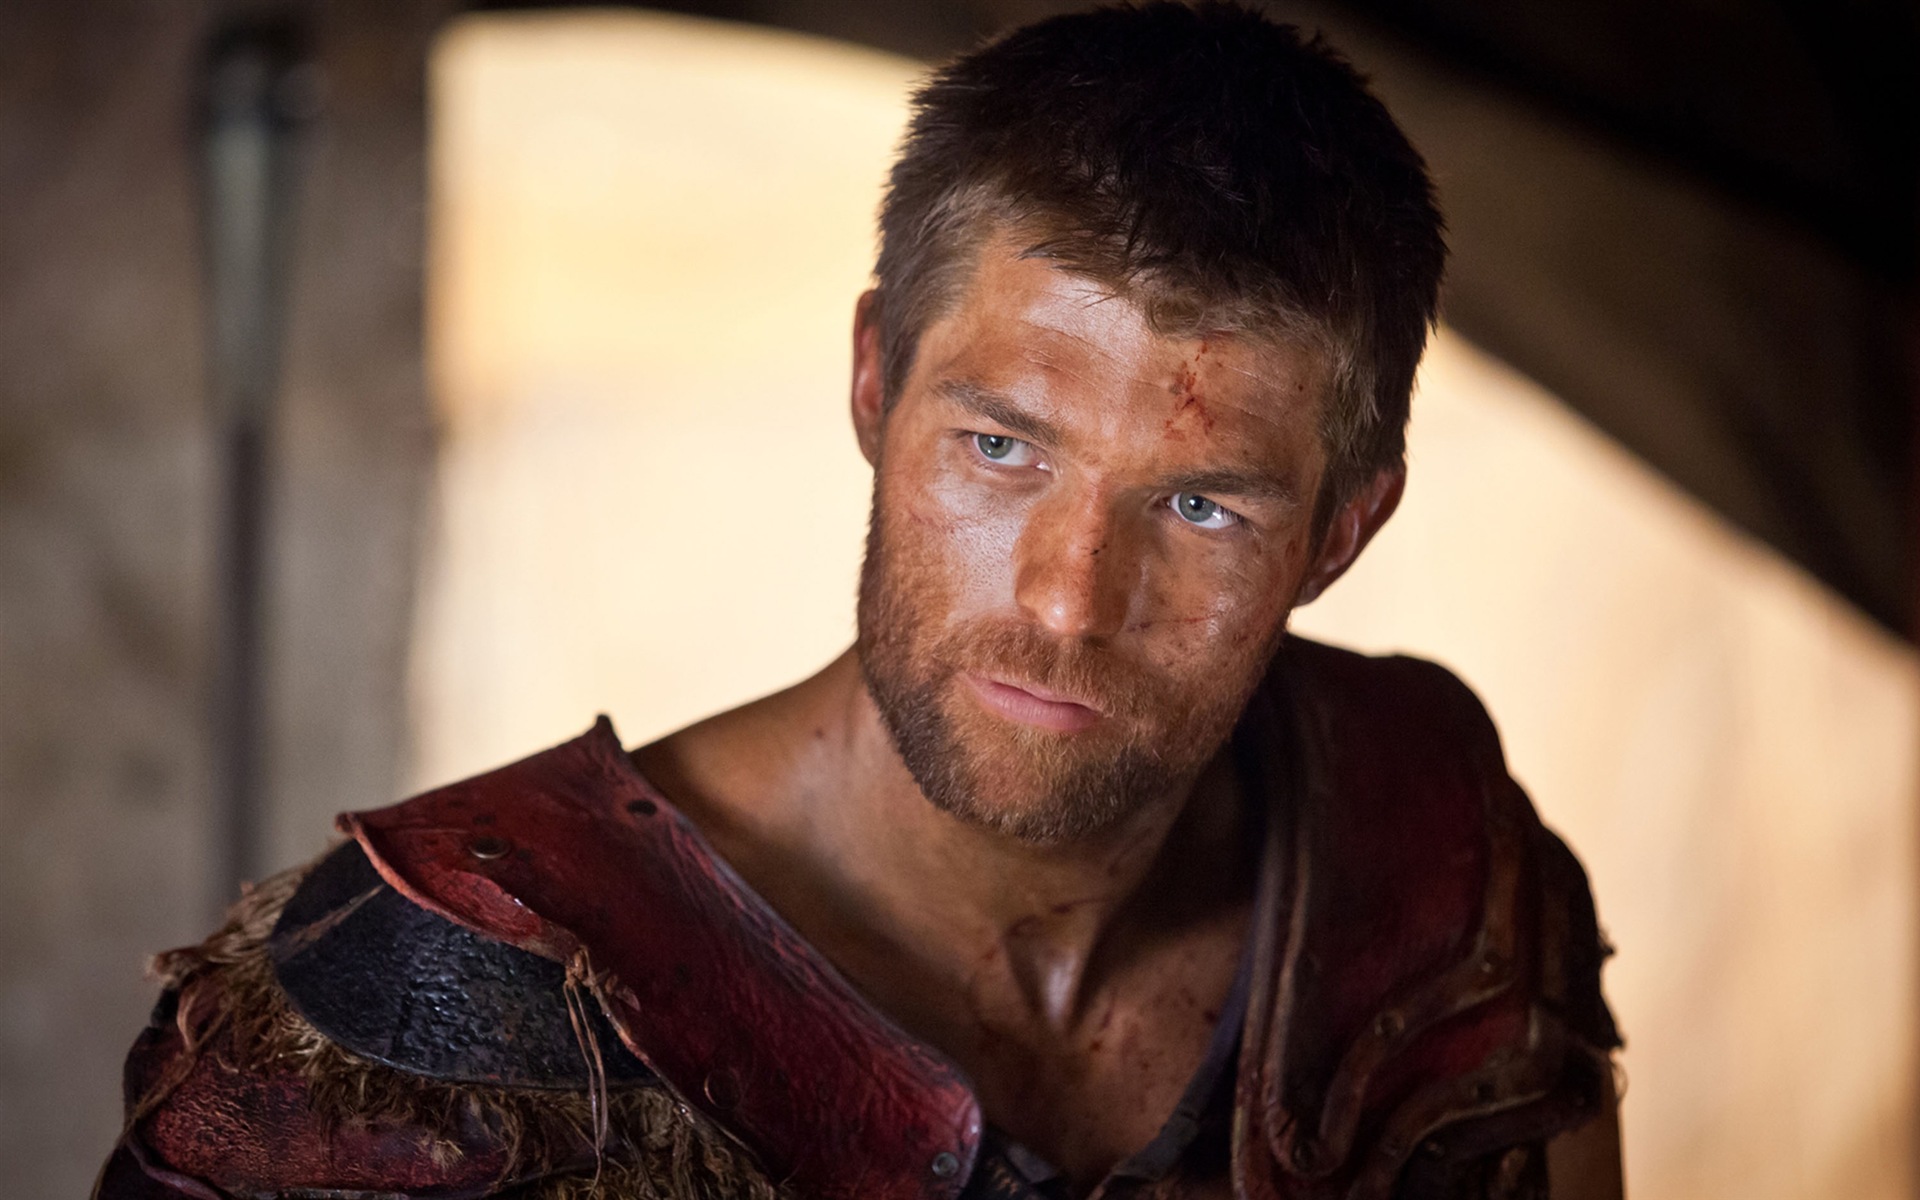 Spartacus: War of the Damned HD Wallpaper #11 - 1920x1200